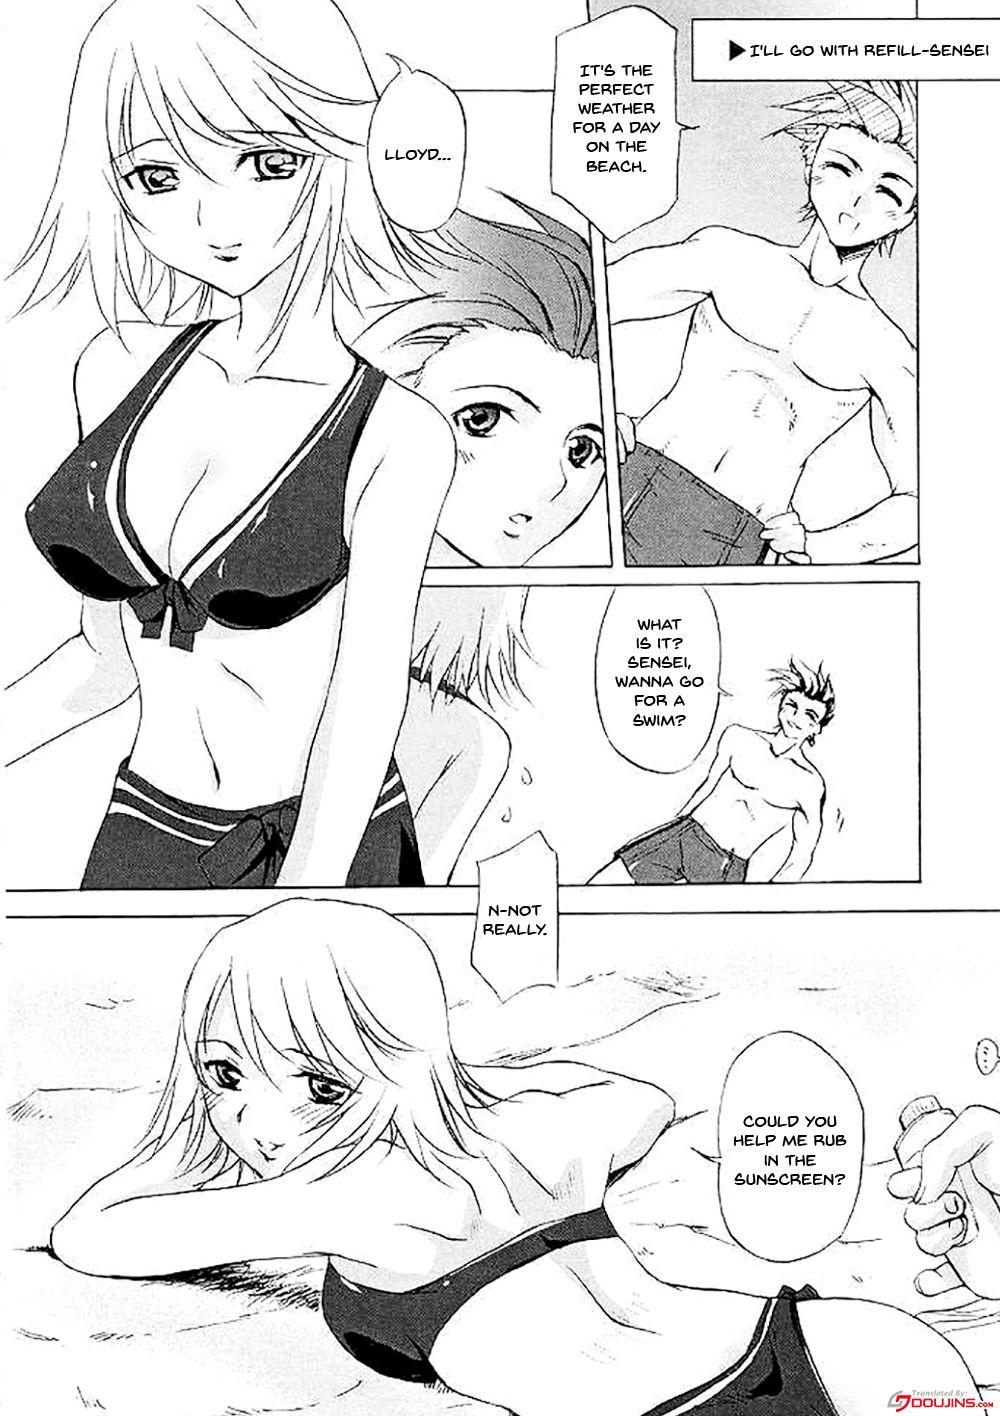 Rola Tales of Seaside - Tales of symphonia Gay Kissing - Page 3